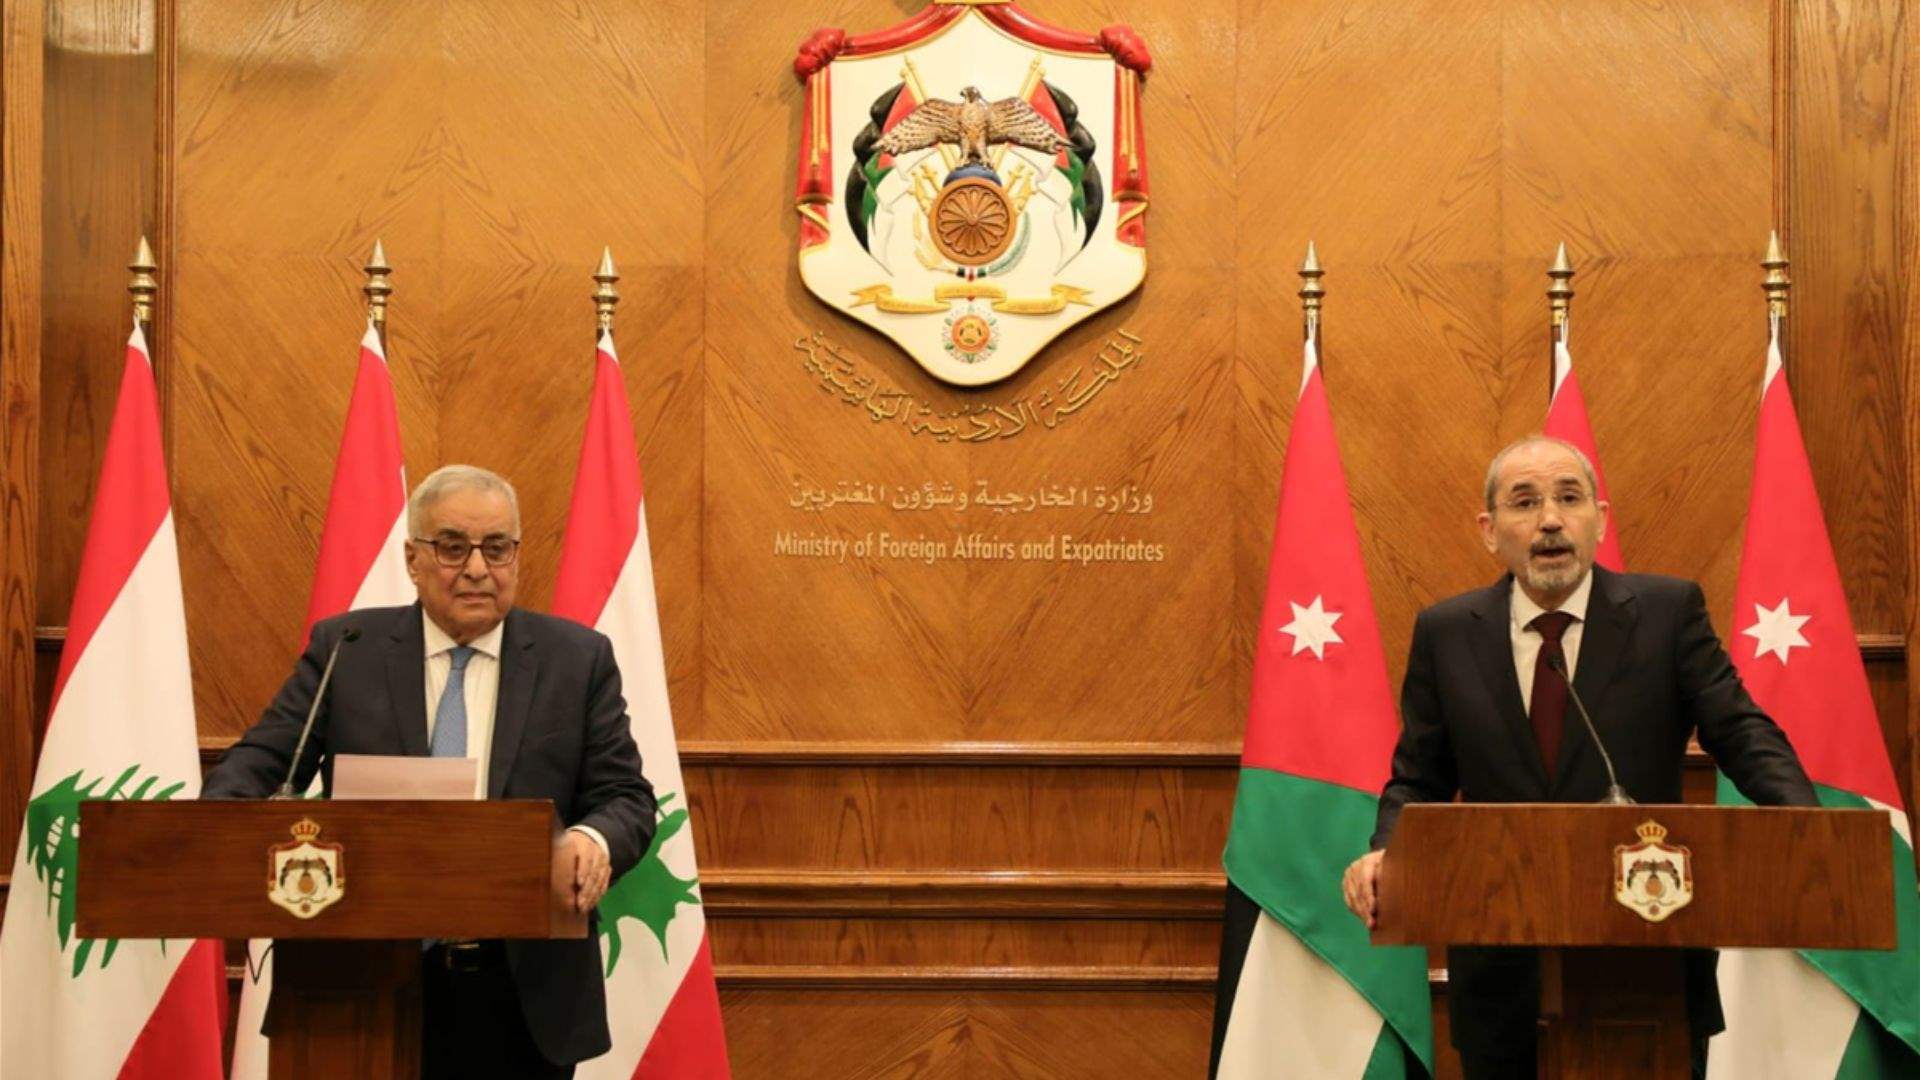 Jordan to provide Lebanon with electricity as soon as it reaches agreement with World Bank